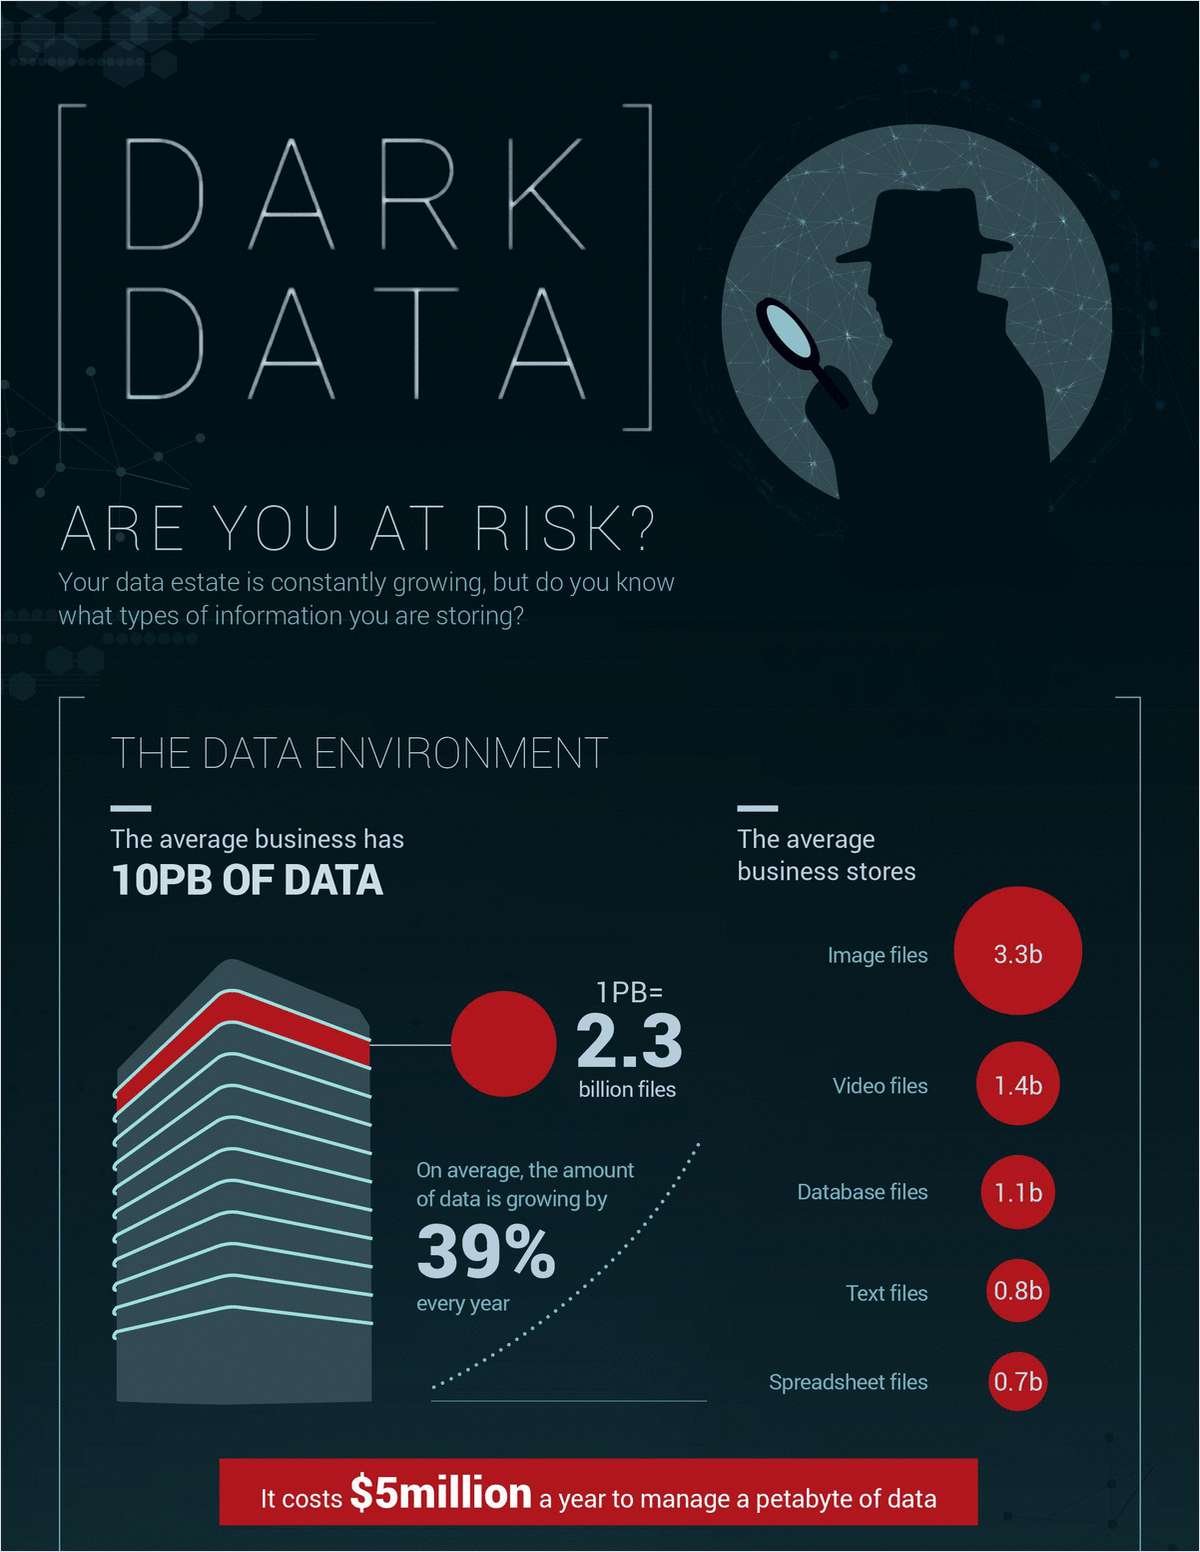 Dark Data: Are You at Risk?